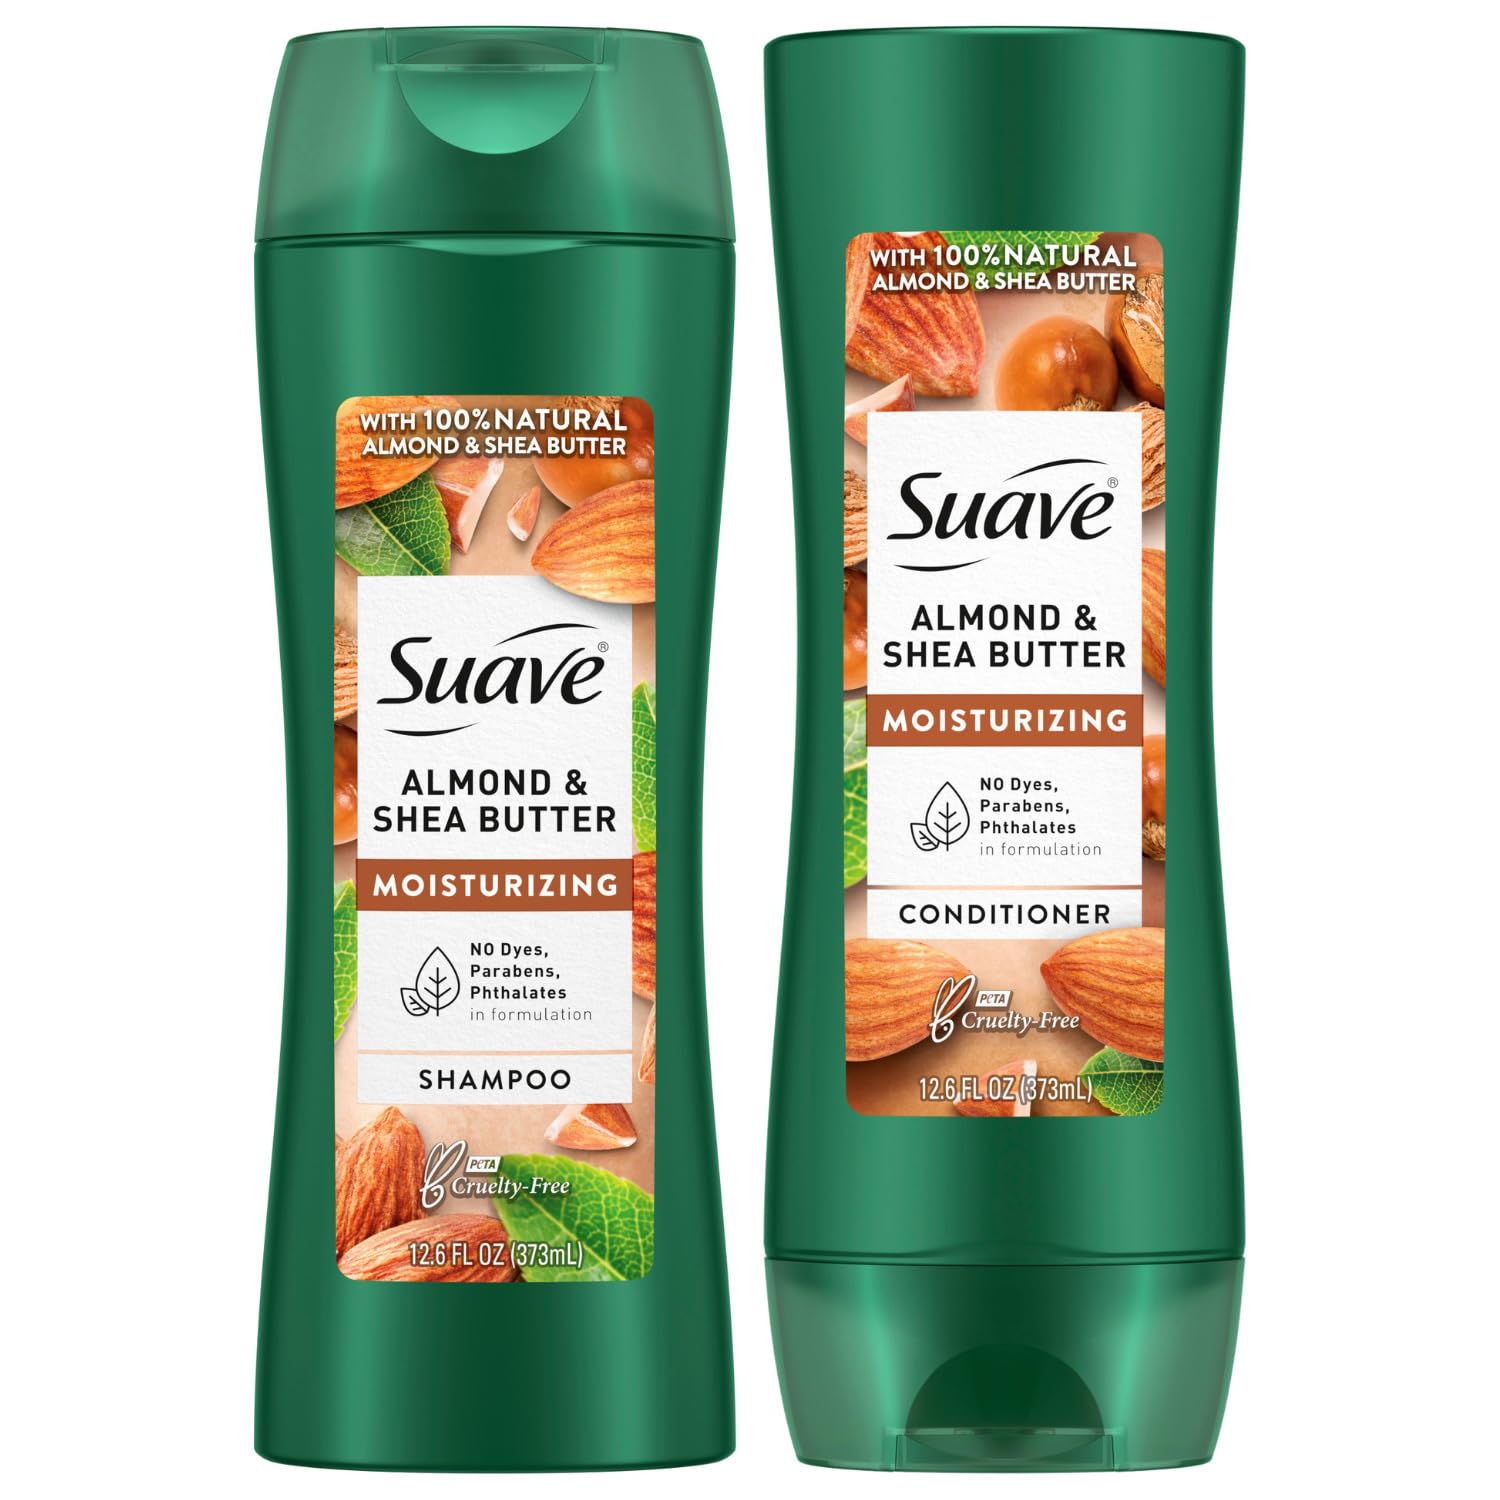 Suave Shampoo and Conditioner Set, Almond & Shea Butter - Moisturizing Shampoo & Conditioner, Dry Hair Treatment, Scented, 12.6 Oz Ea (2 Piece Set)